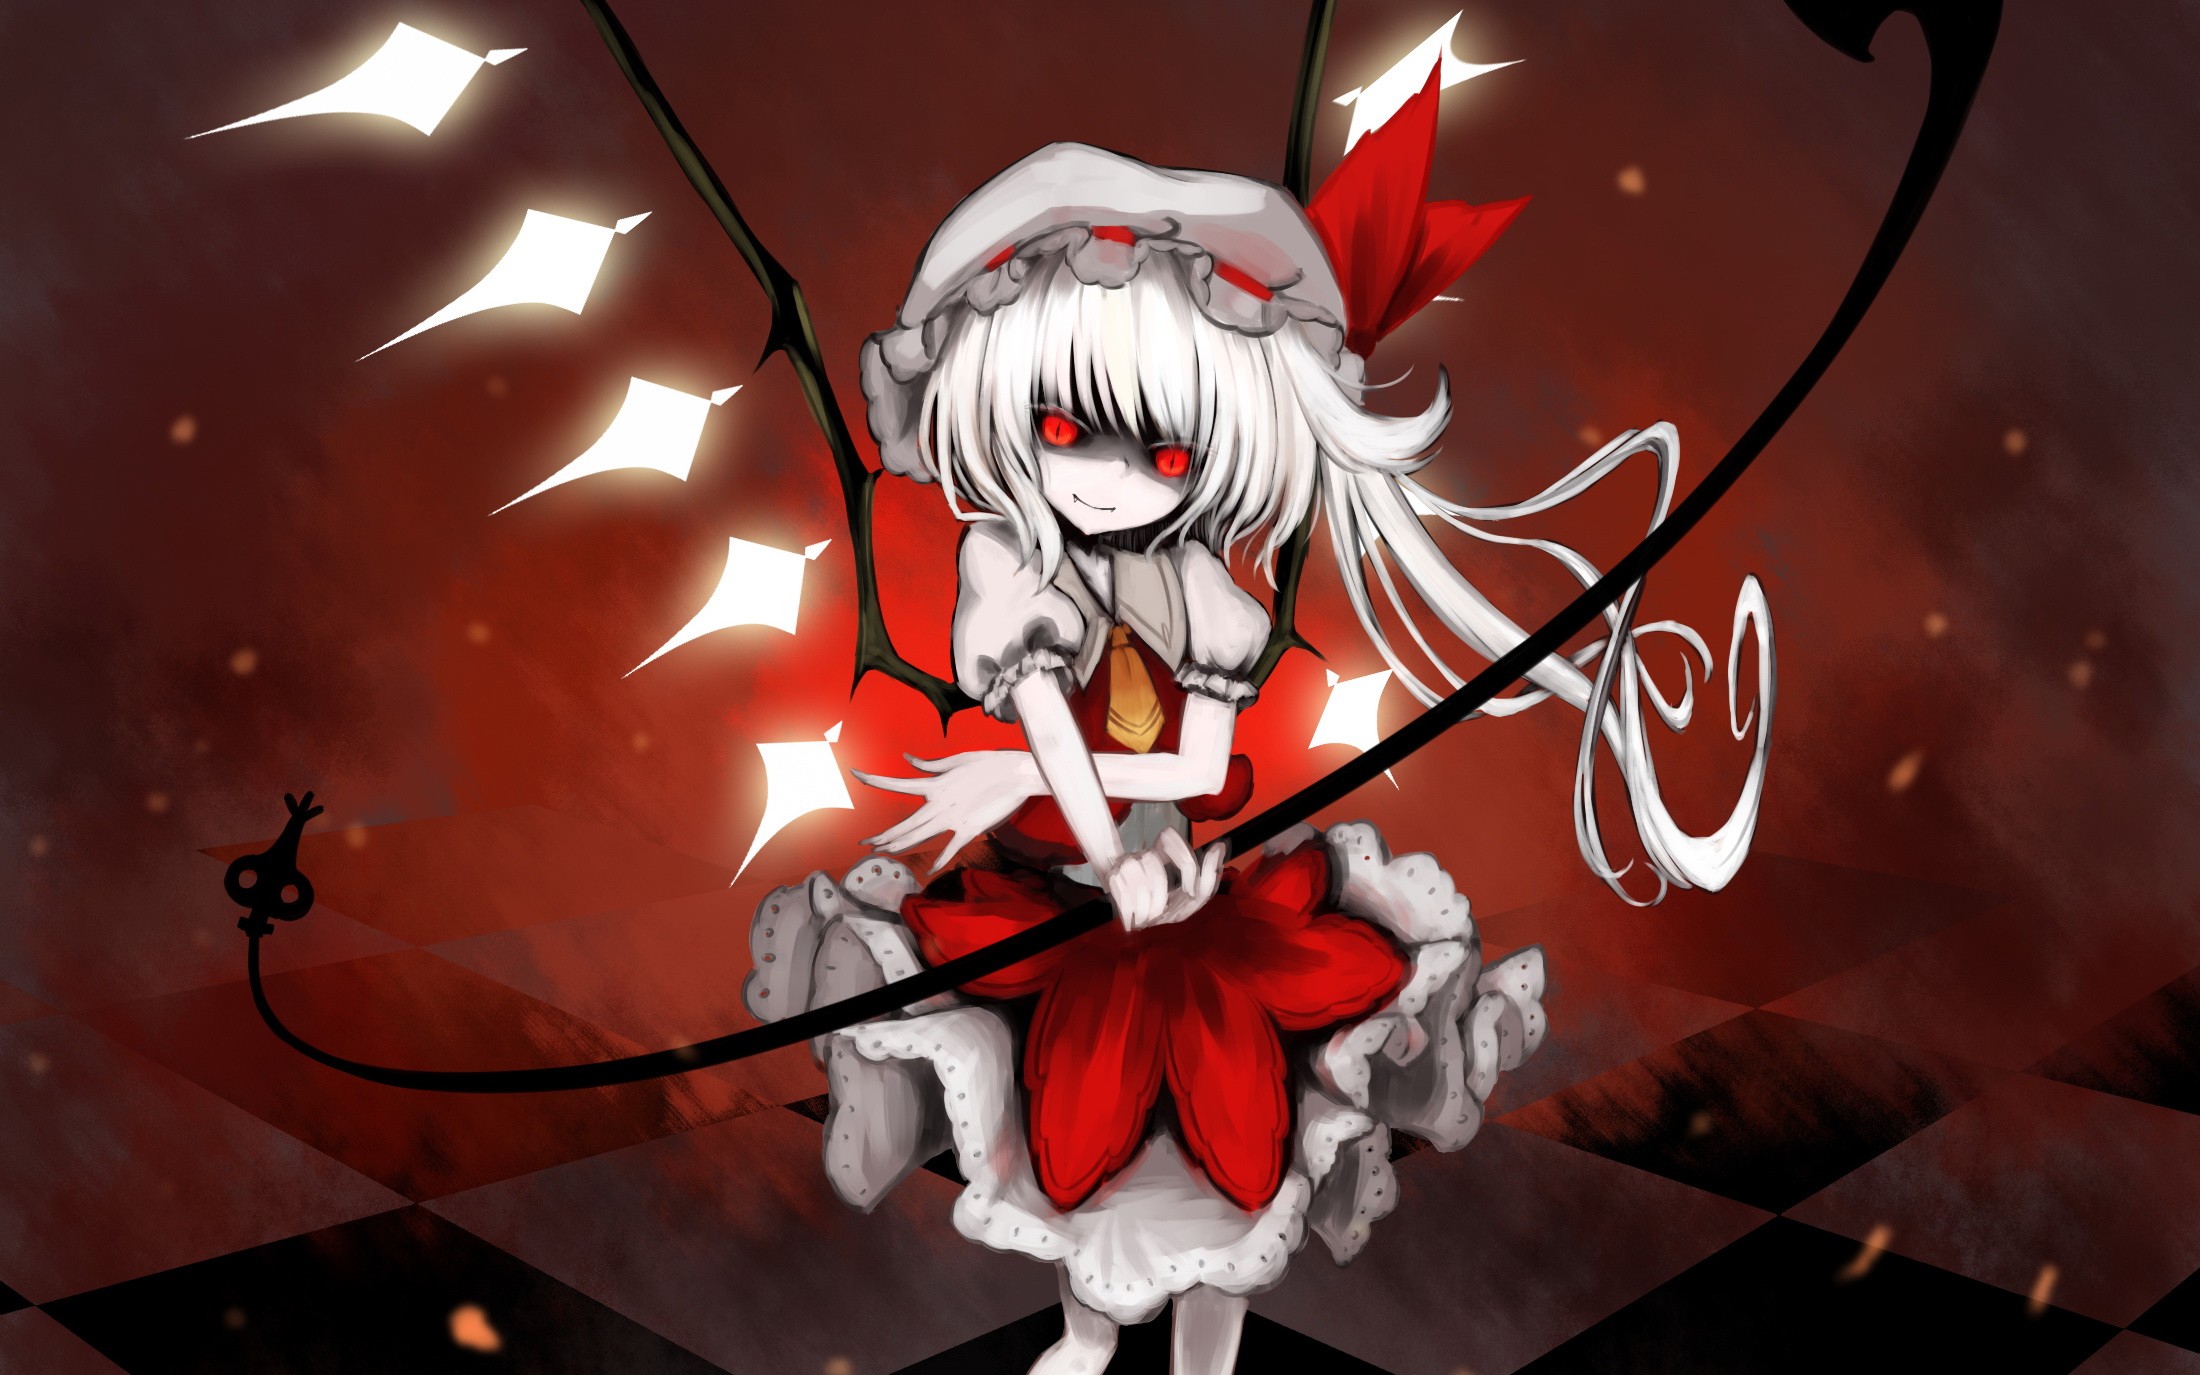 video, Games, Touhou, Wings, Skirts, Long, Hair, Weapons, Vampires, Red, Eyes, Checkered, Spears, Ponytails, White, Hair, Flandre, Scarlet, Hats, Glowing, Eyes, Laevateinn, Slit, Pupils, Side, Ponytail Wallpaper